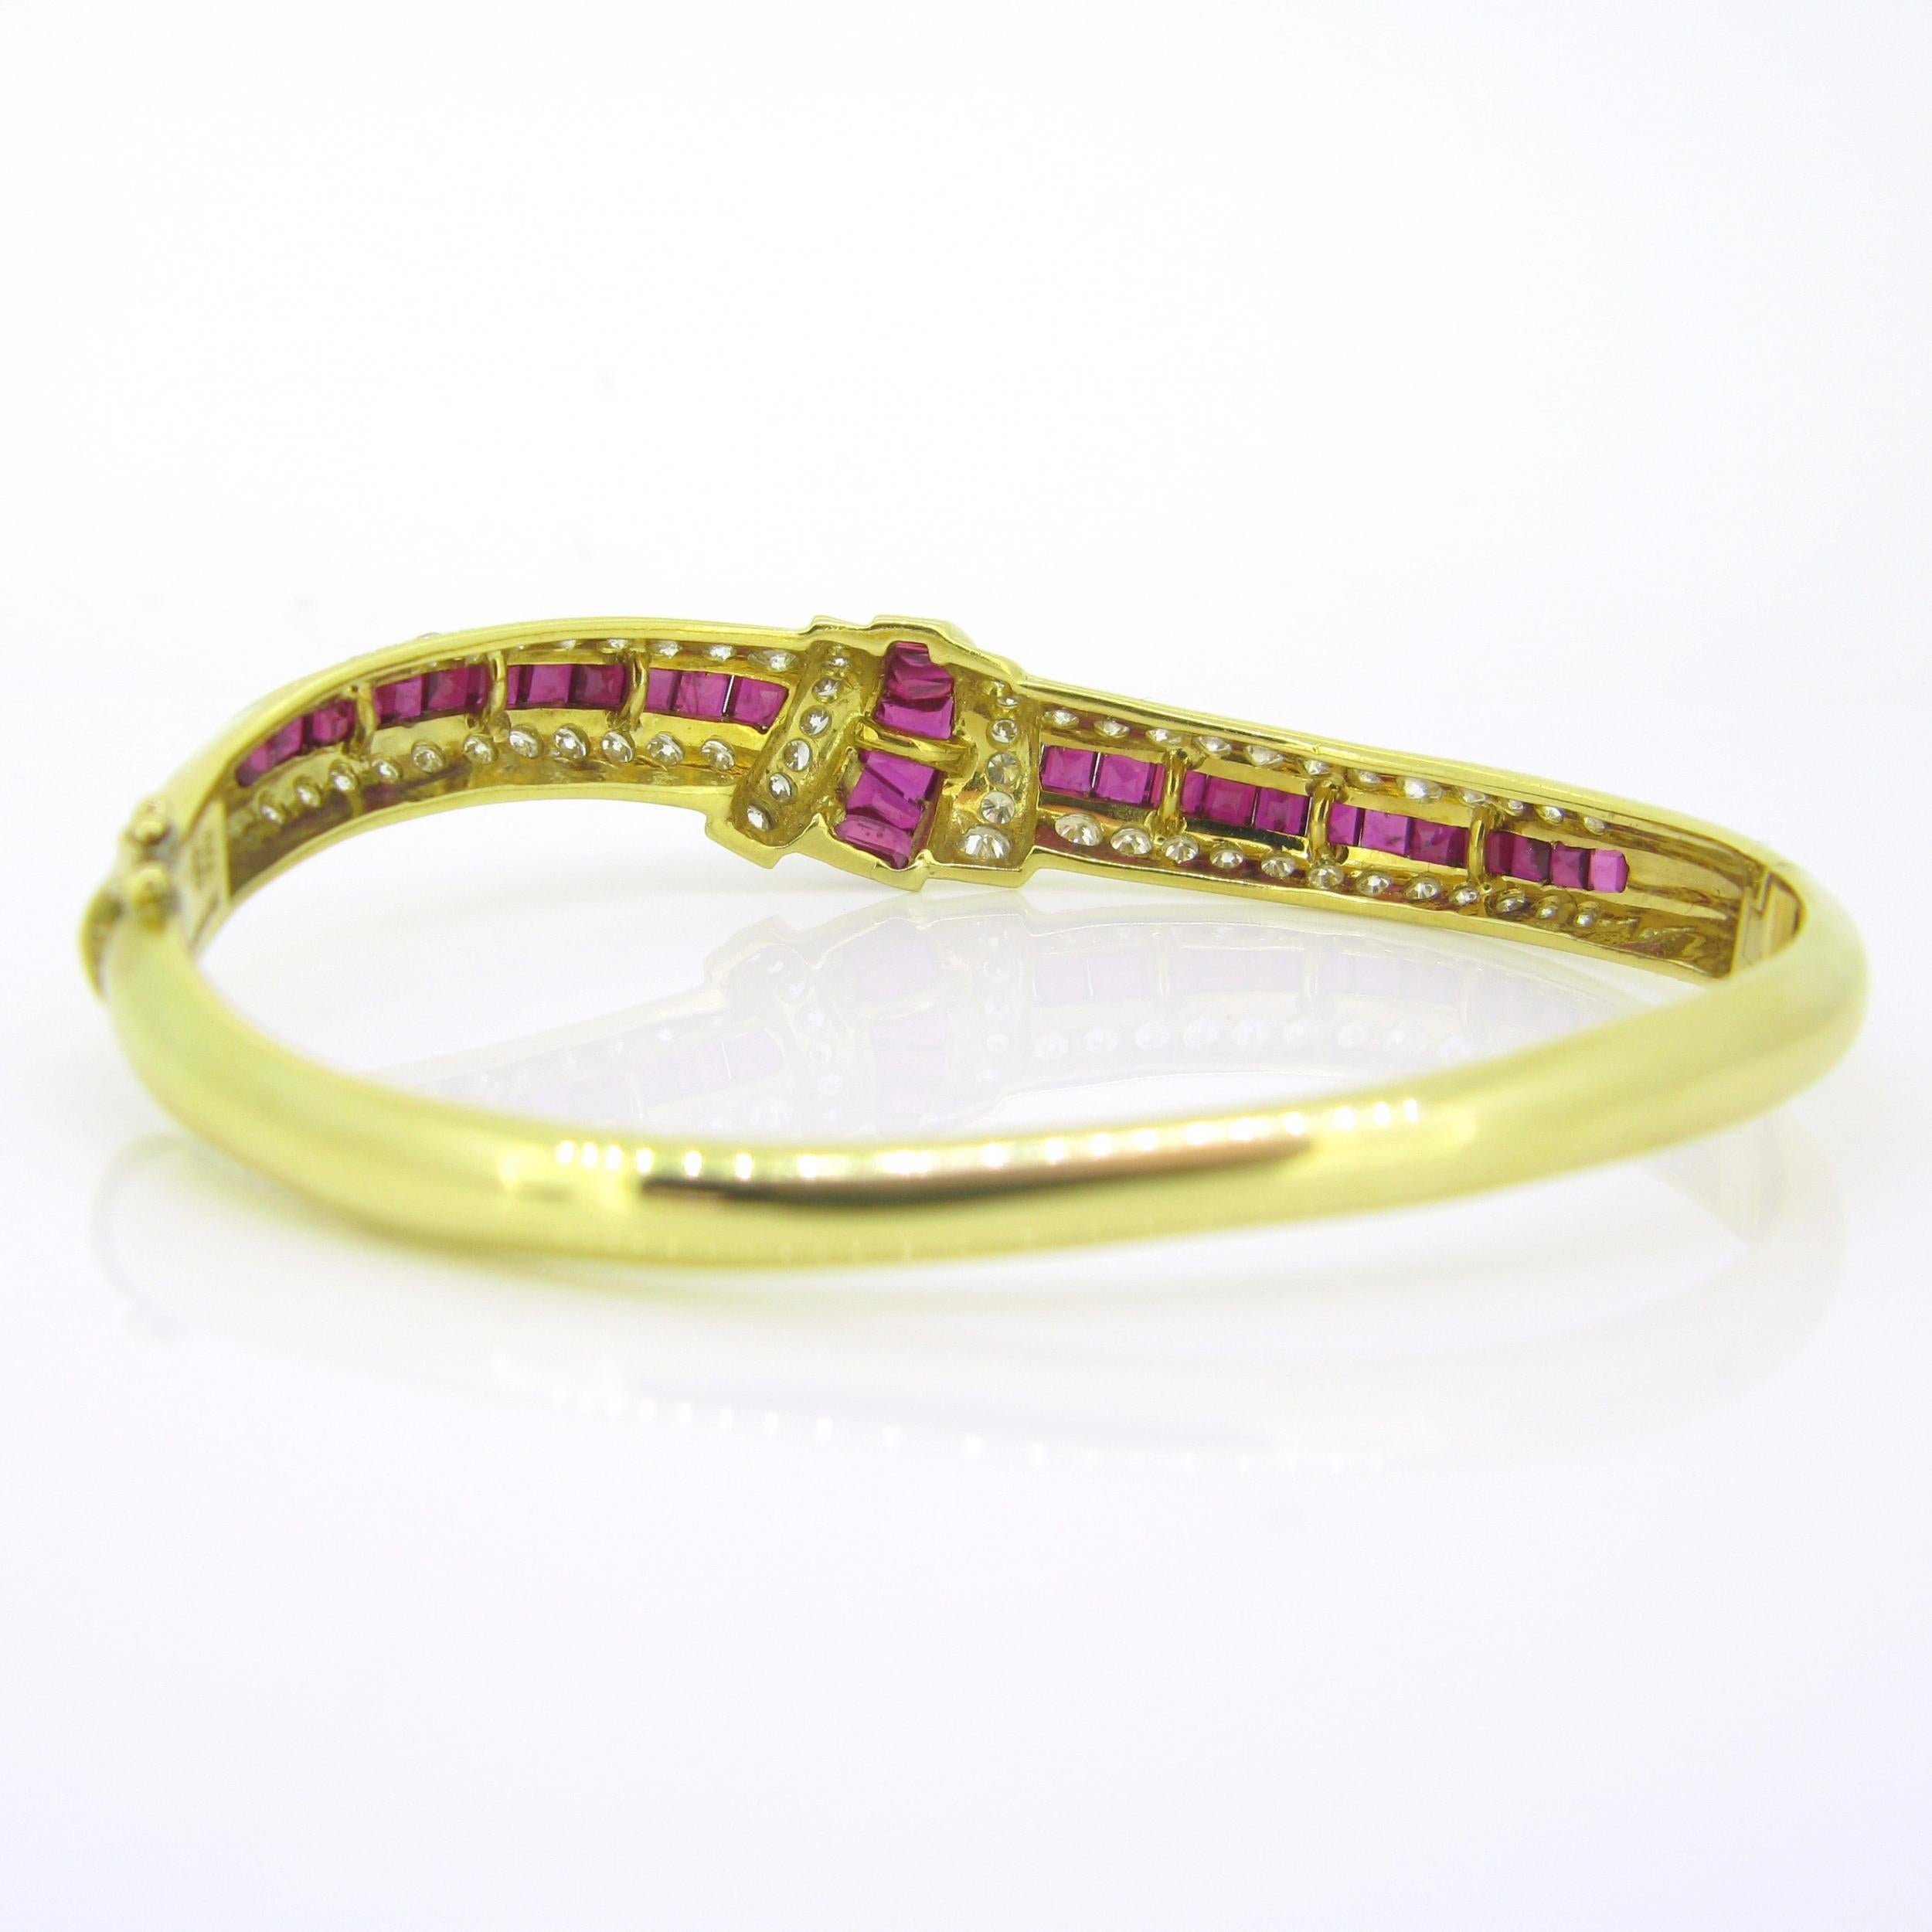 Women's or Men's Calibrated Rubies and Diamonds Bangle Bracelet, 18kt Yellow Gold